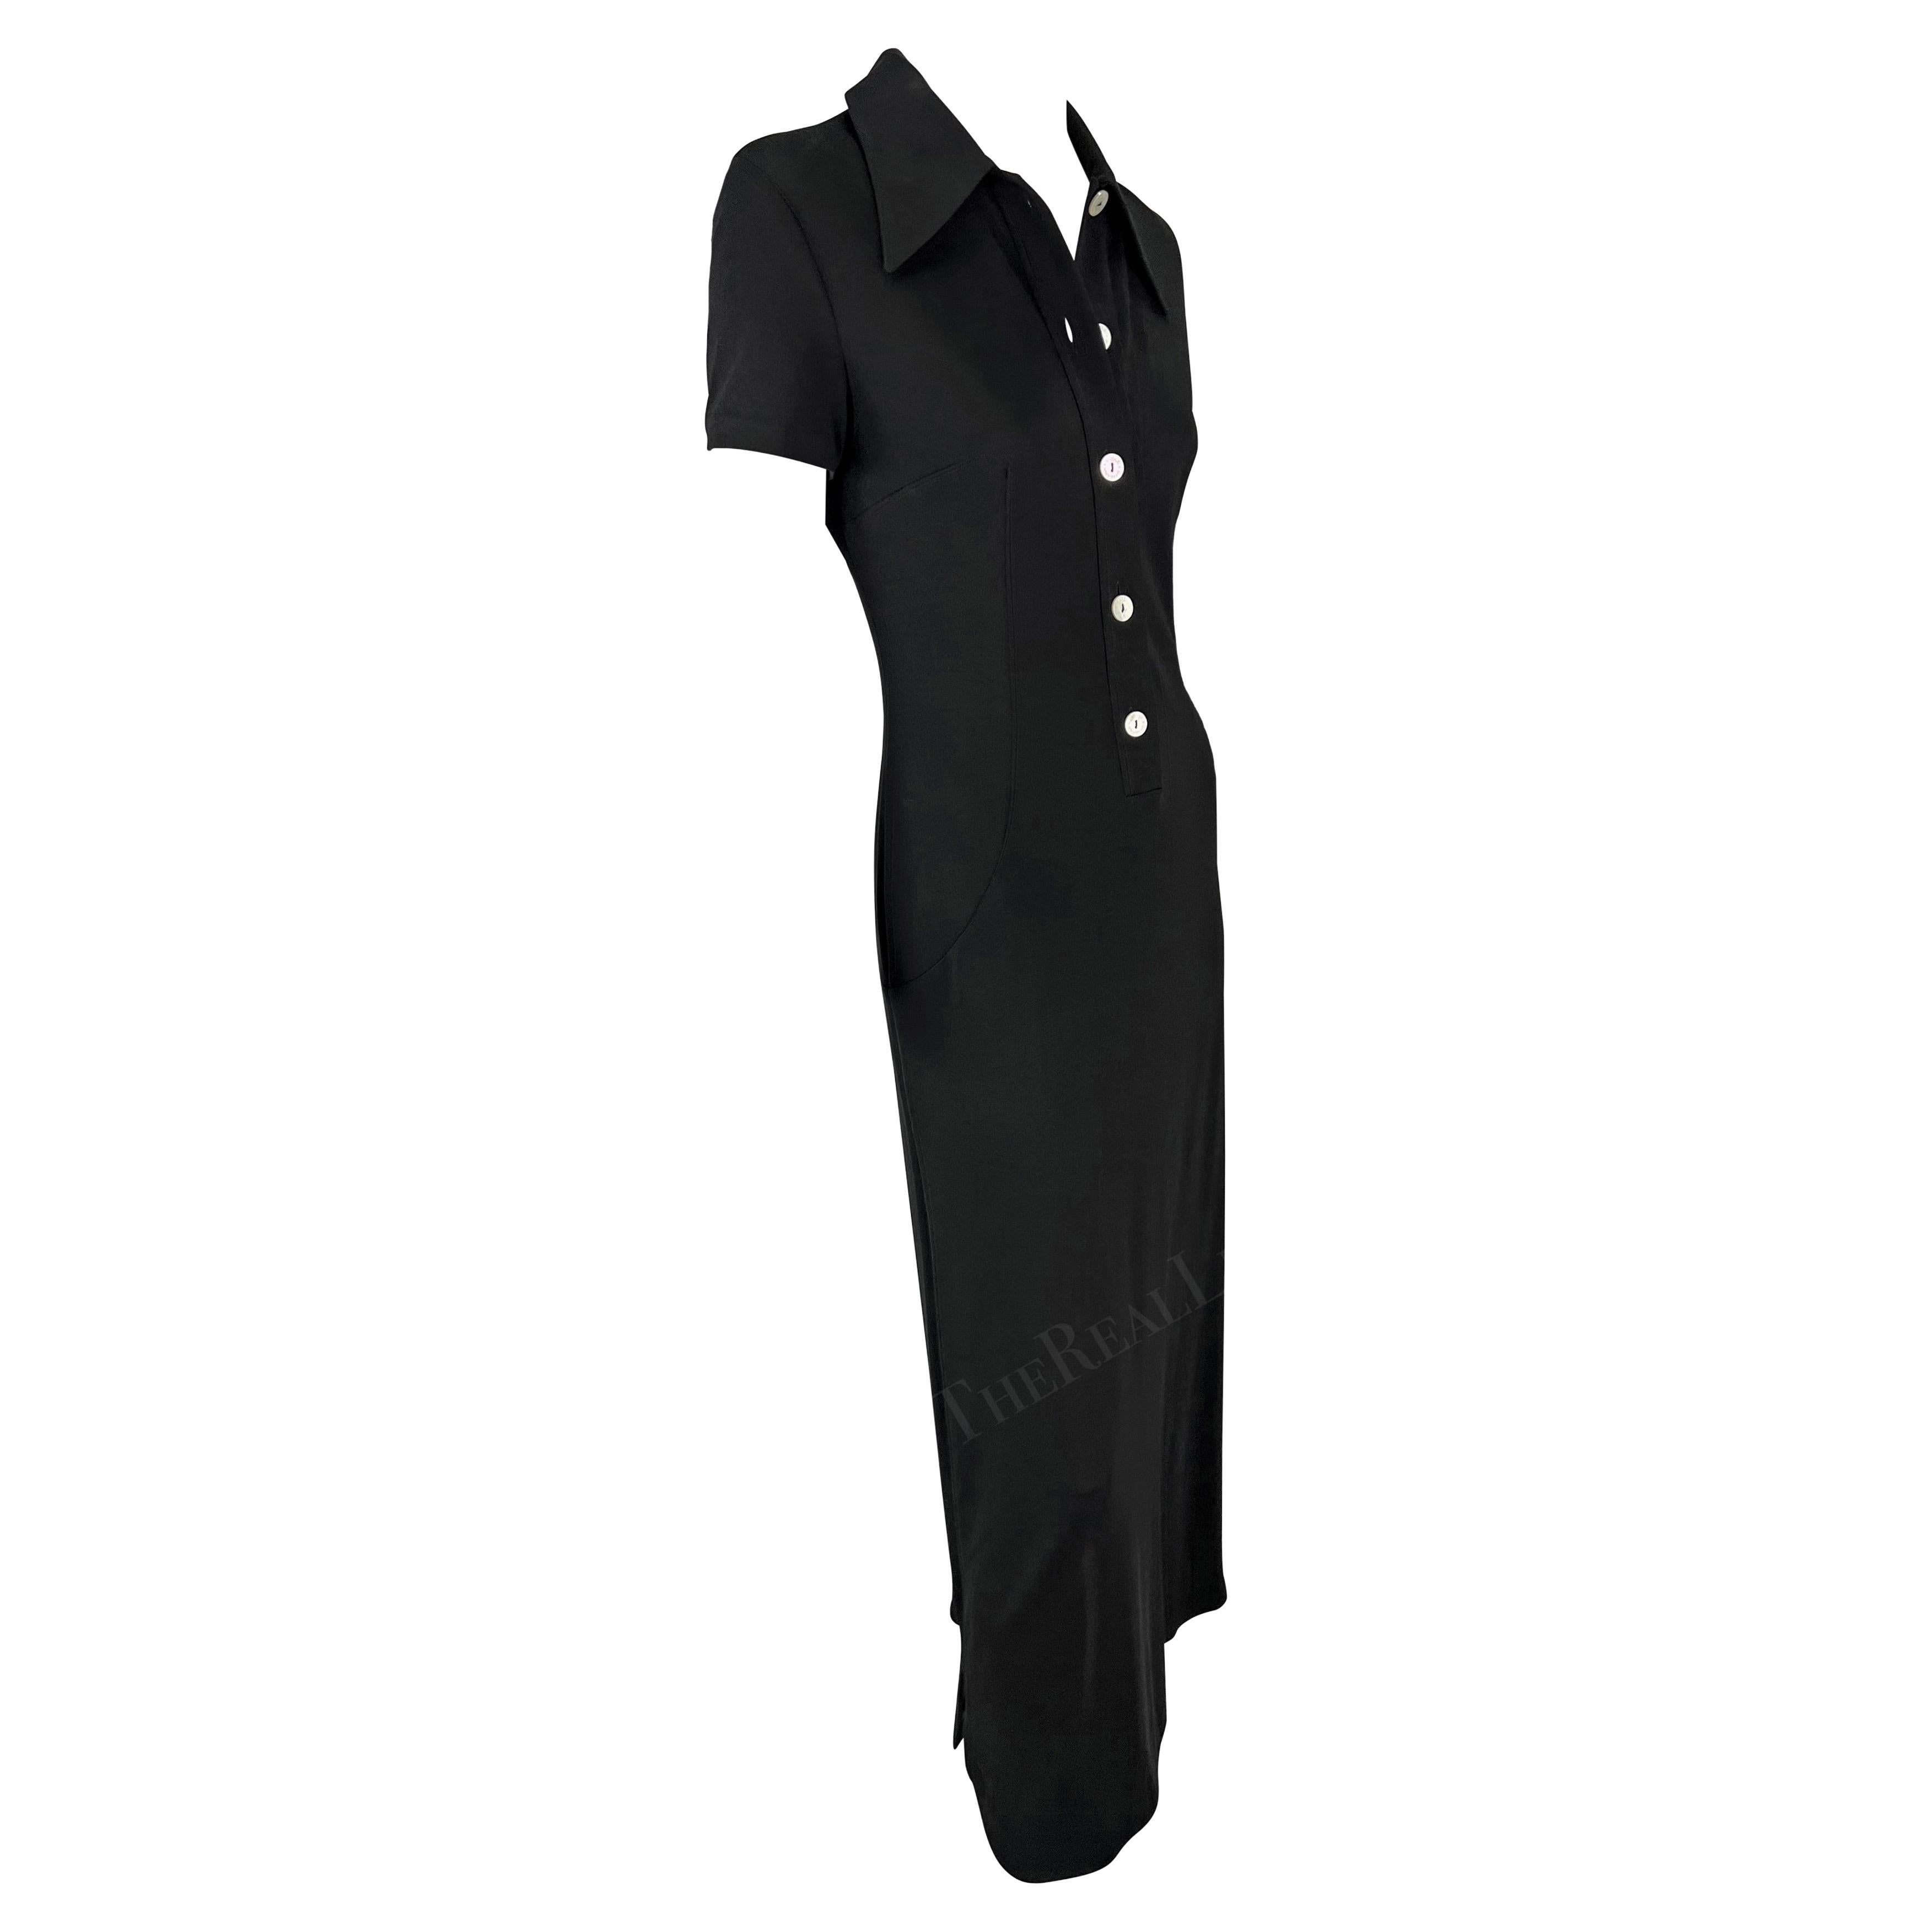 S/S 1996 Dolce & Gabbana Runway Black Collared Plunge Button Maxi Dress For Sale 2